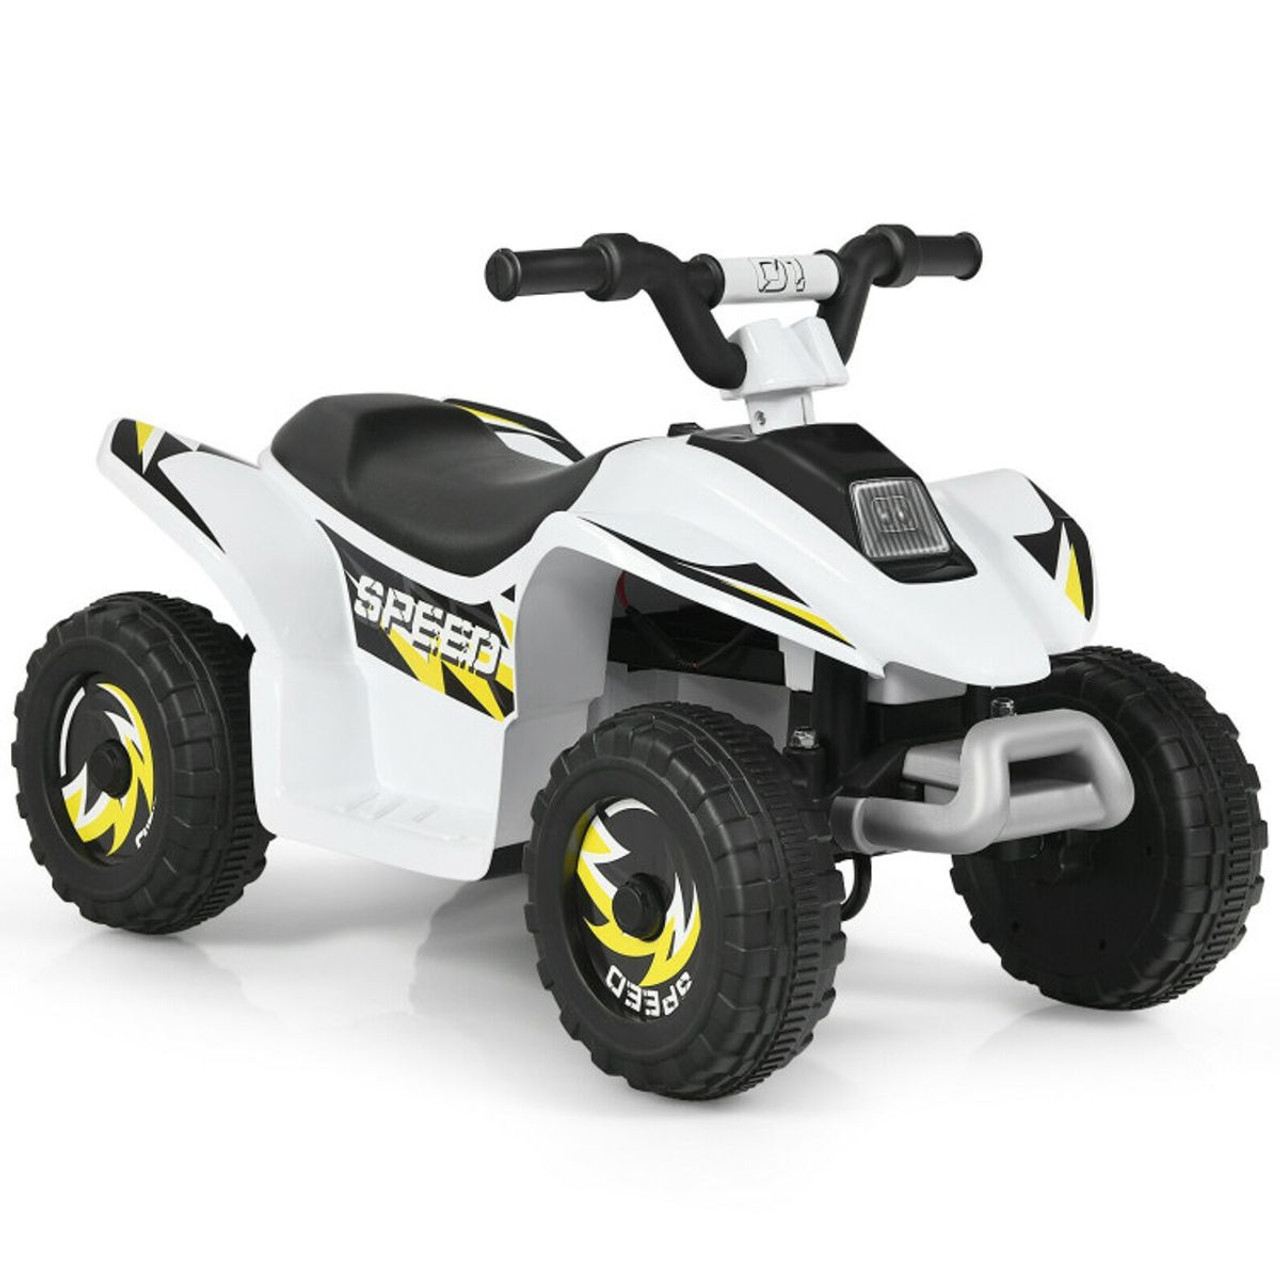 Kids' 6V Electric ATV 4 Wheels Ride-on Toy product image